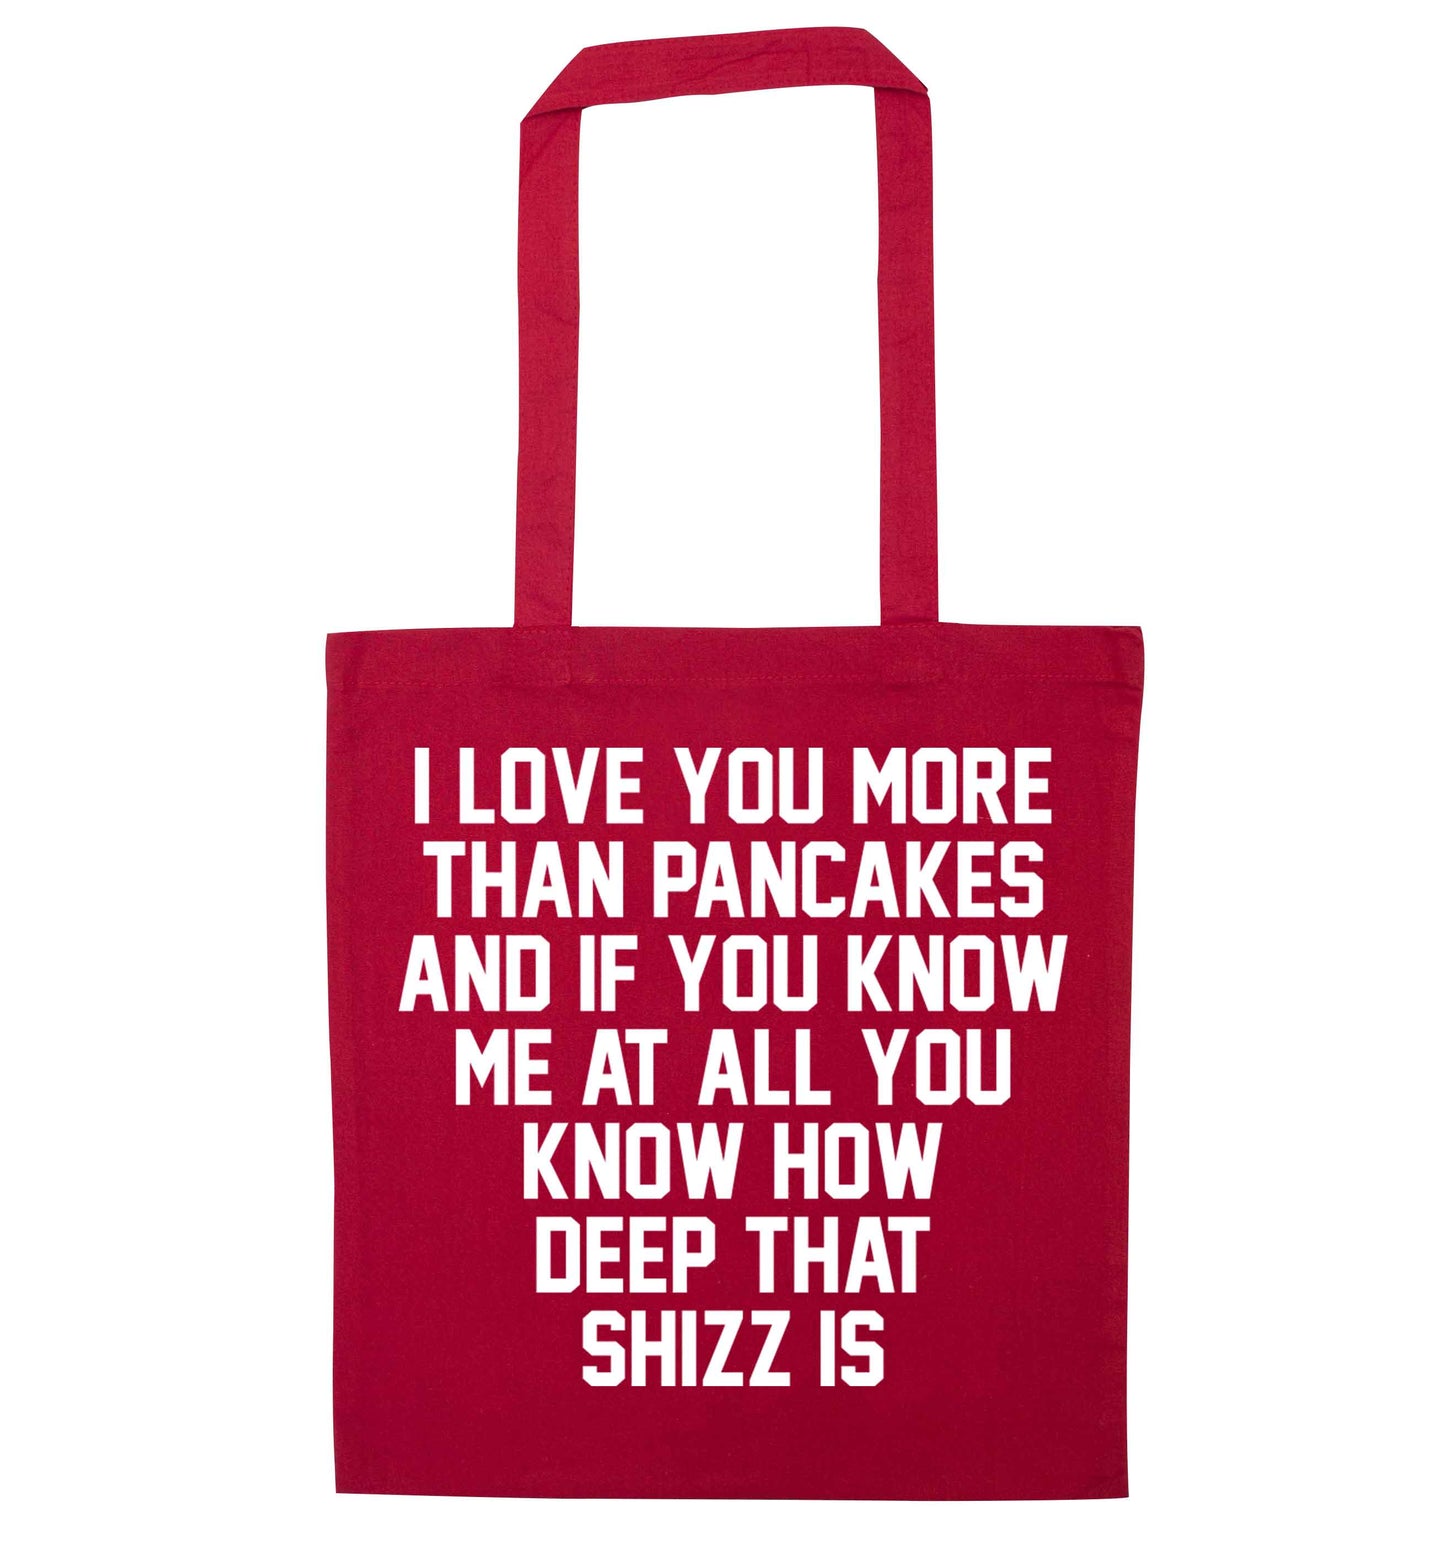 I love you more than pancakes and if you know me at all you know how deep that shizz is red tote bag